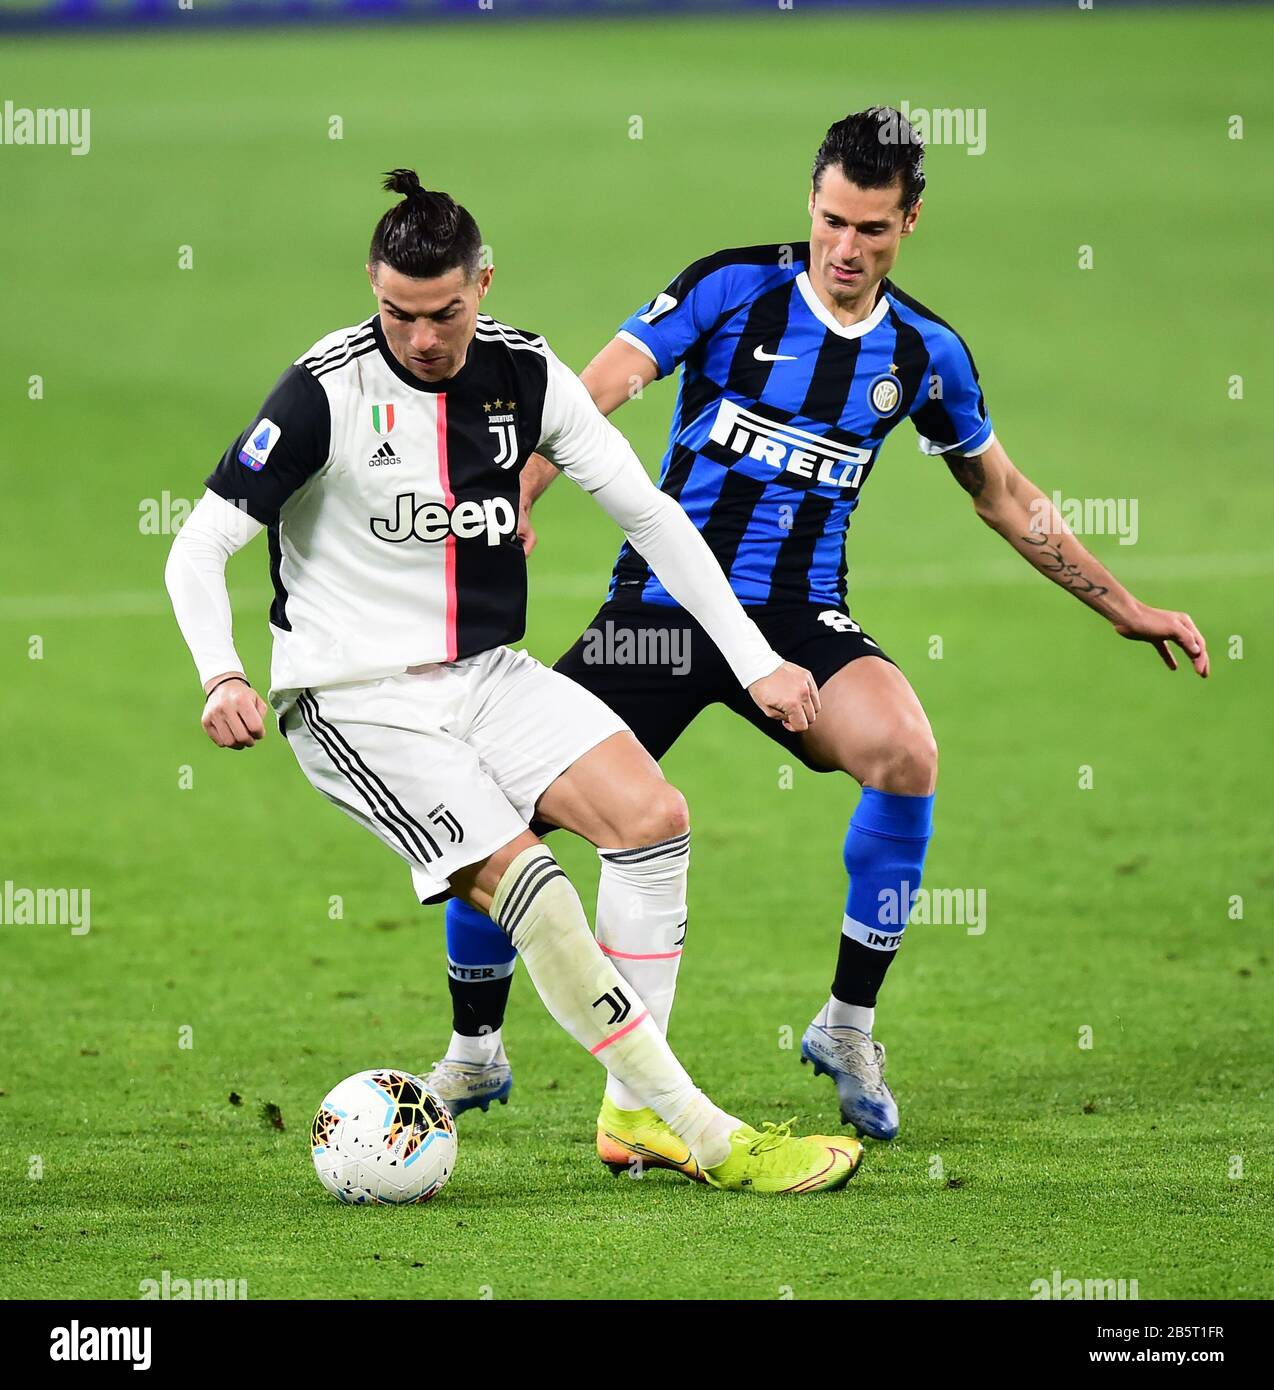 Turin, Italy. 8th Mar, 2020. Cristiano Ronaldo (L) of Juventus vies with  Antonio Candreva of Inter Milan during the Italian Serie A soccer match  between Juventus and Inter Milan in Turin, Italy